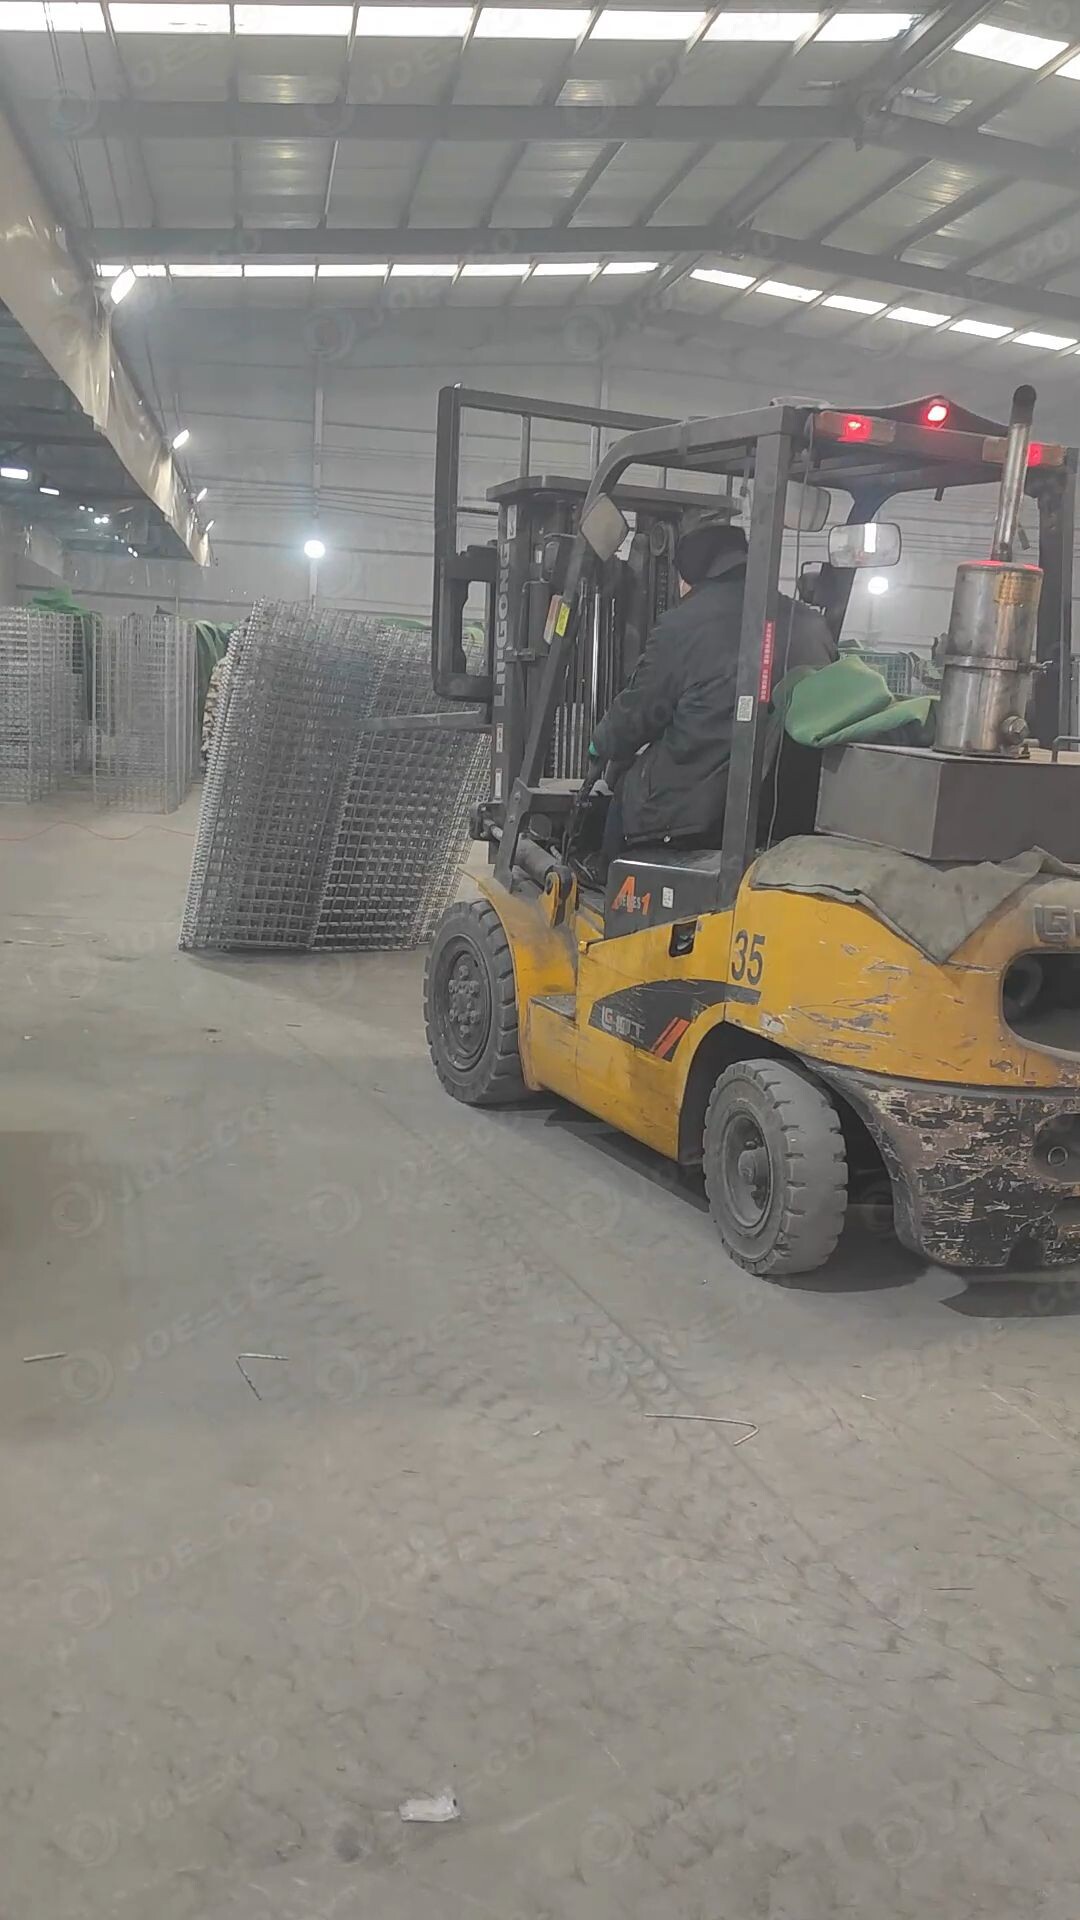 How to use a forklift to stand up an military barrier. thumbnail 1